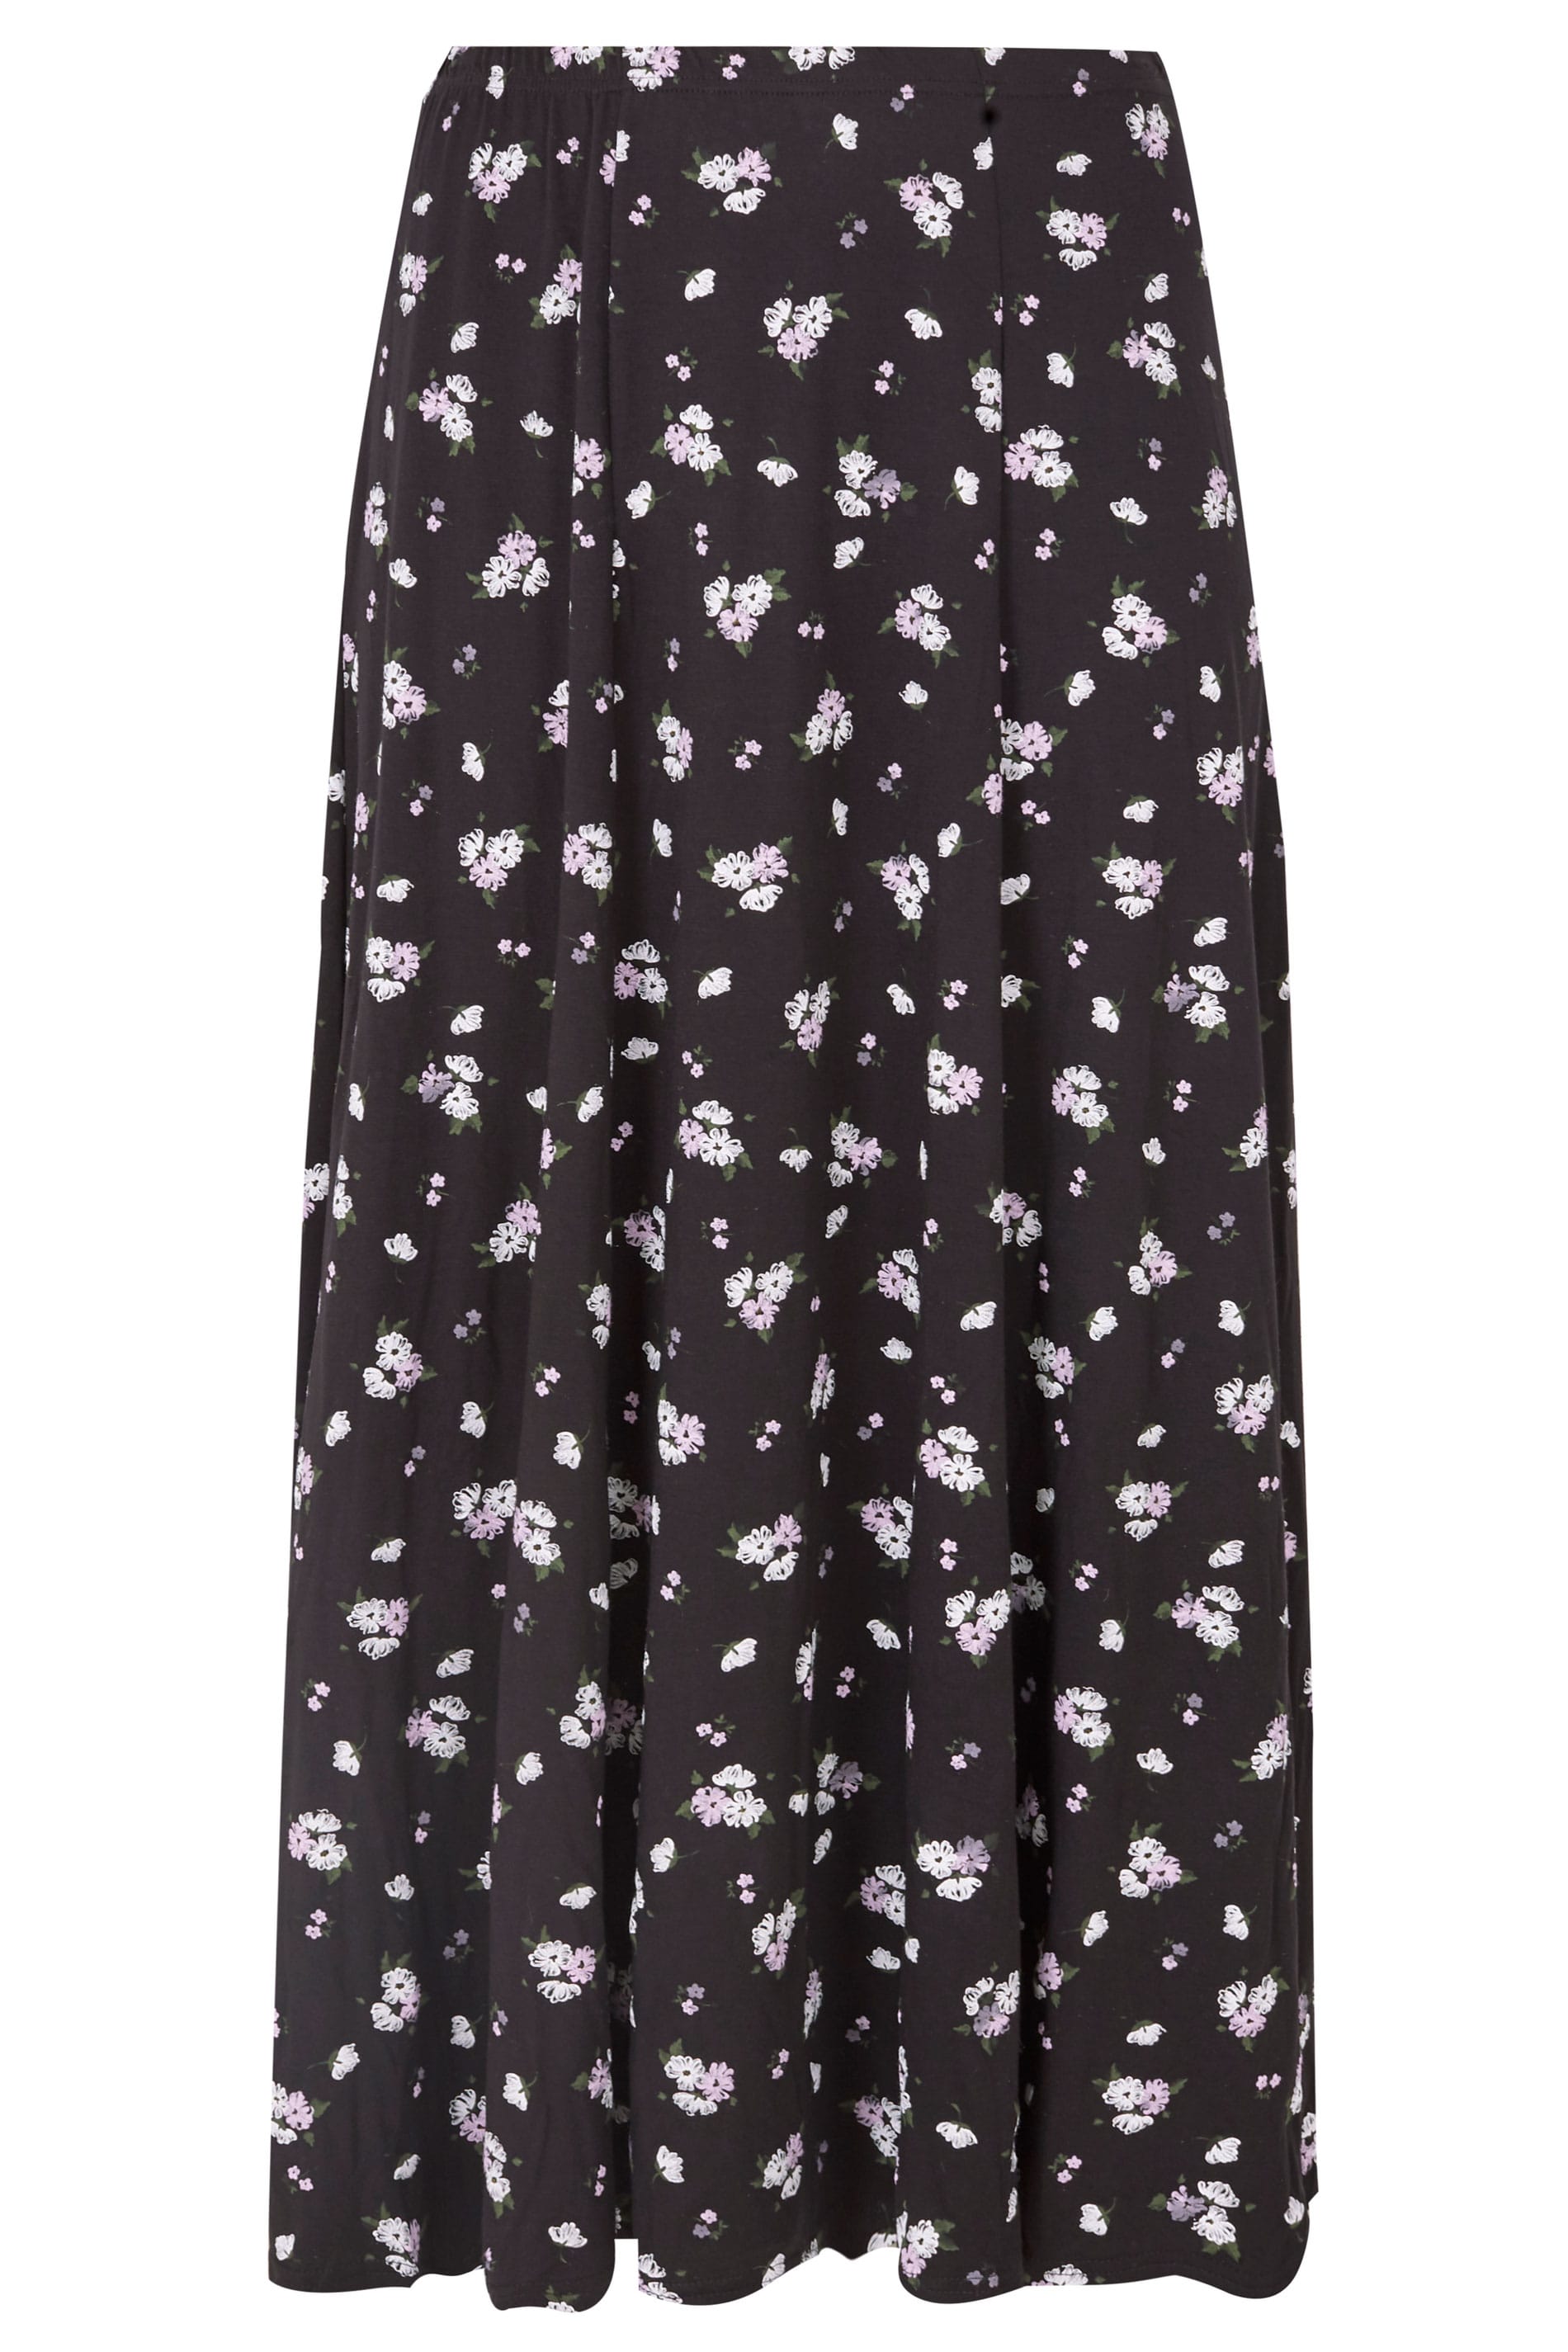 Black & Purple Floral Print Maxi Skirt, plus size 16 to 36 | Yours Clothing